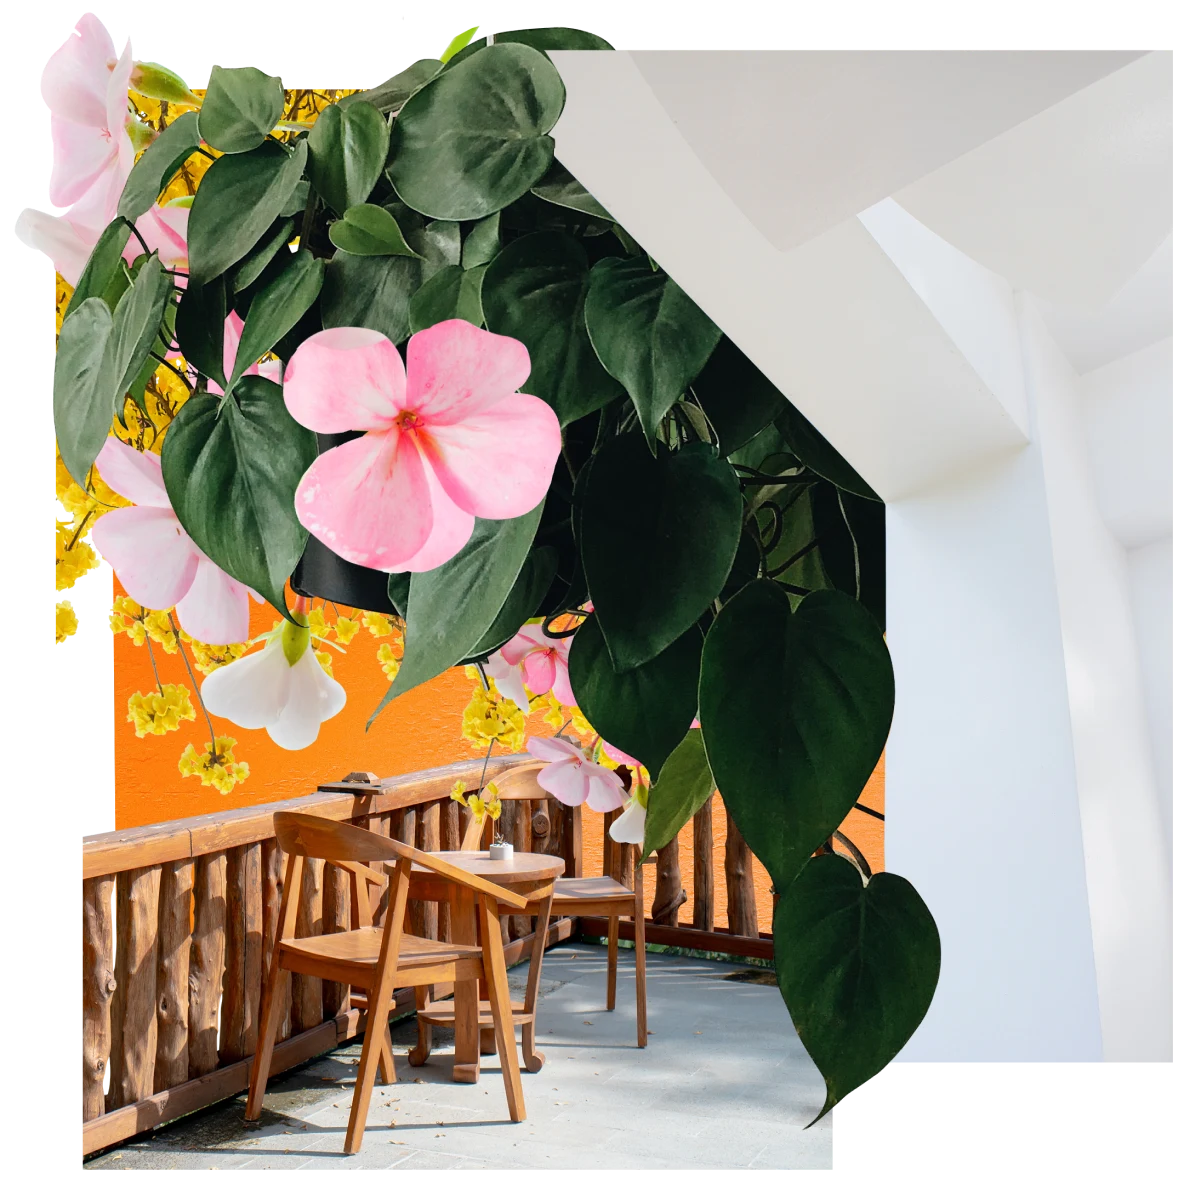 Collage of green, brown, yellow and white items. Green leaves flowing down from a ceiling at center, interwoven with pink and yellow flowers. Underneath a white staircase at right. Two wooden chairs and a round table on an outdoor deck in the foreground.